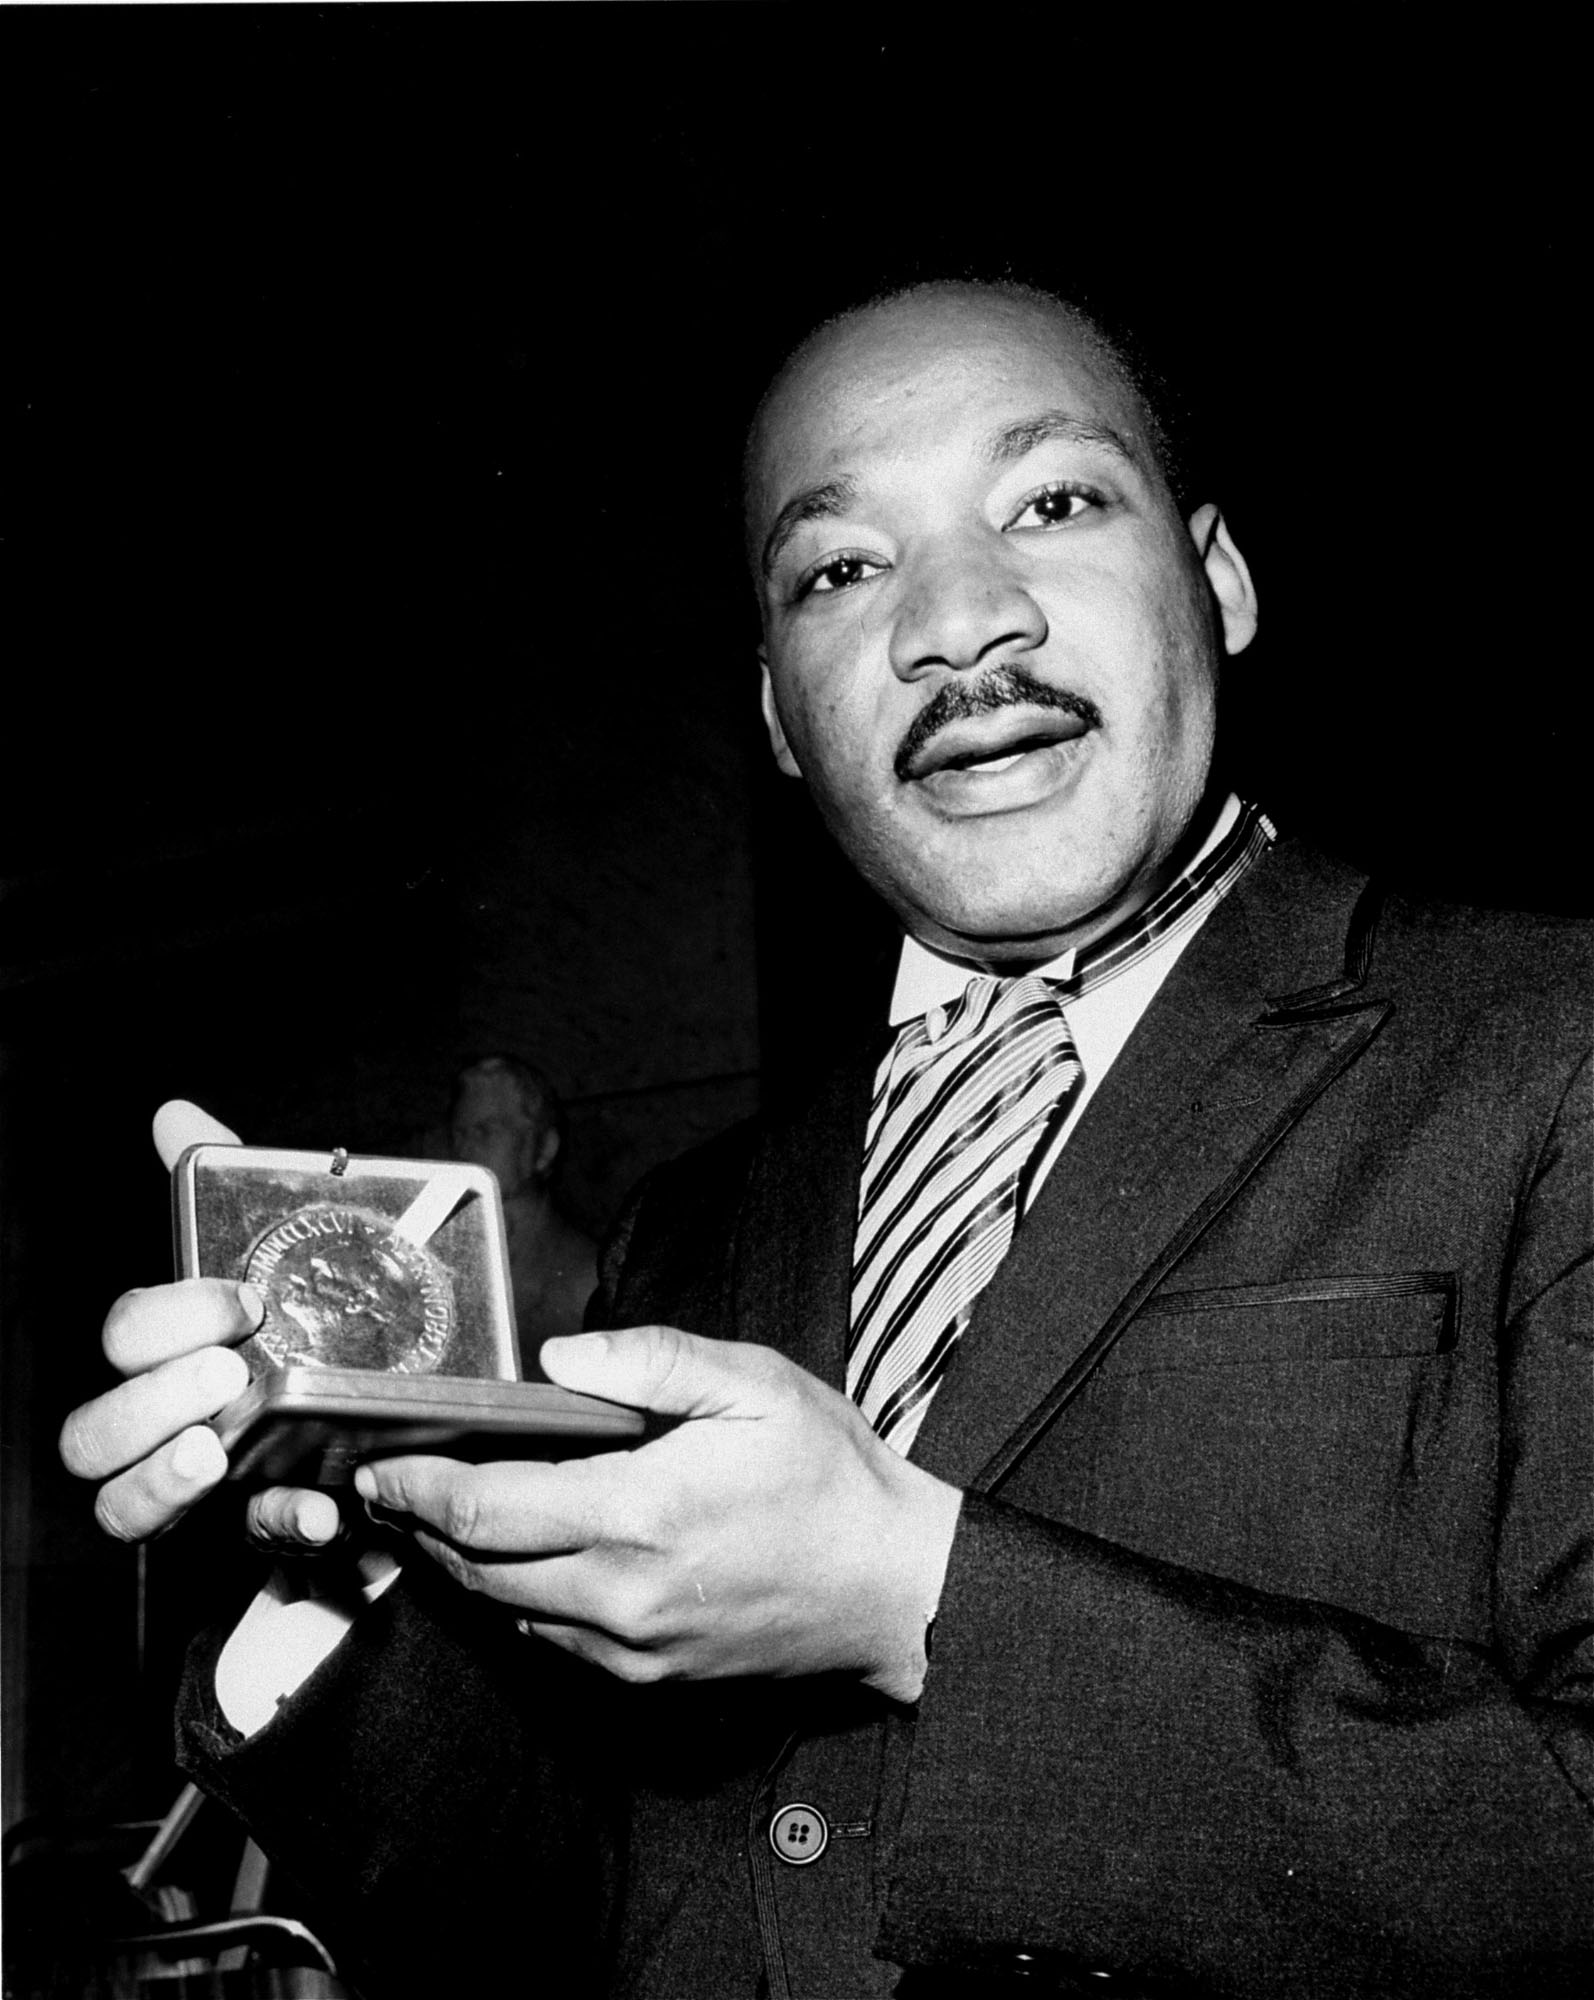 Opinion: Martin Luther King Jr.’s 3 keys to saving the world